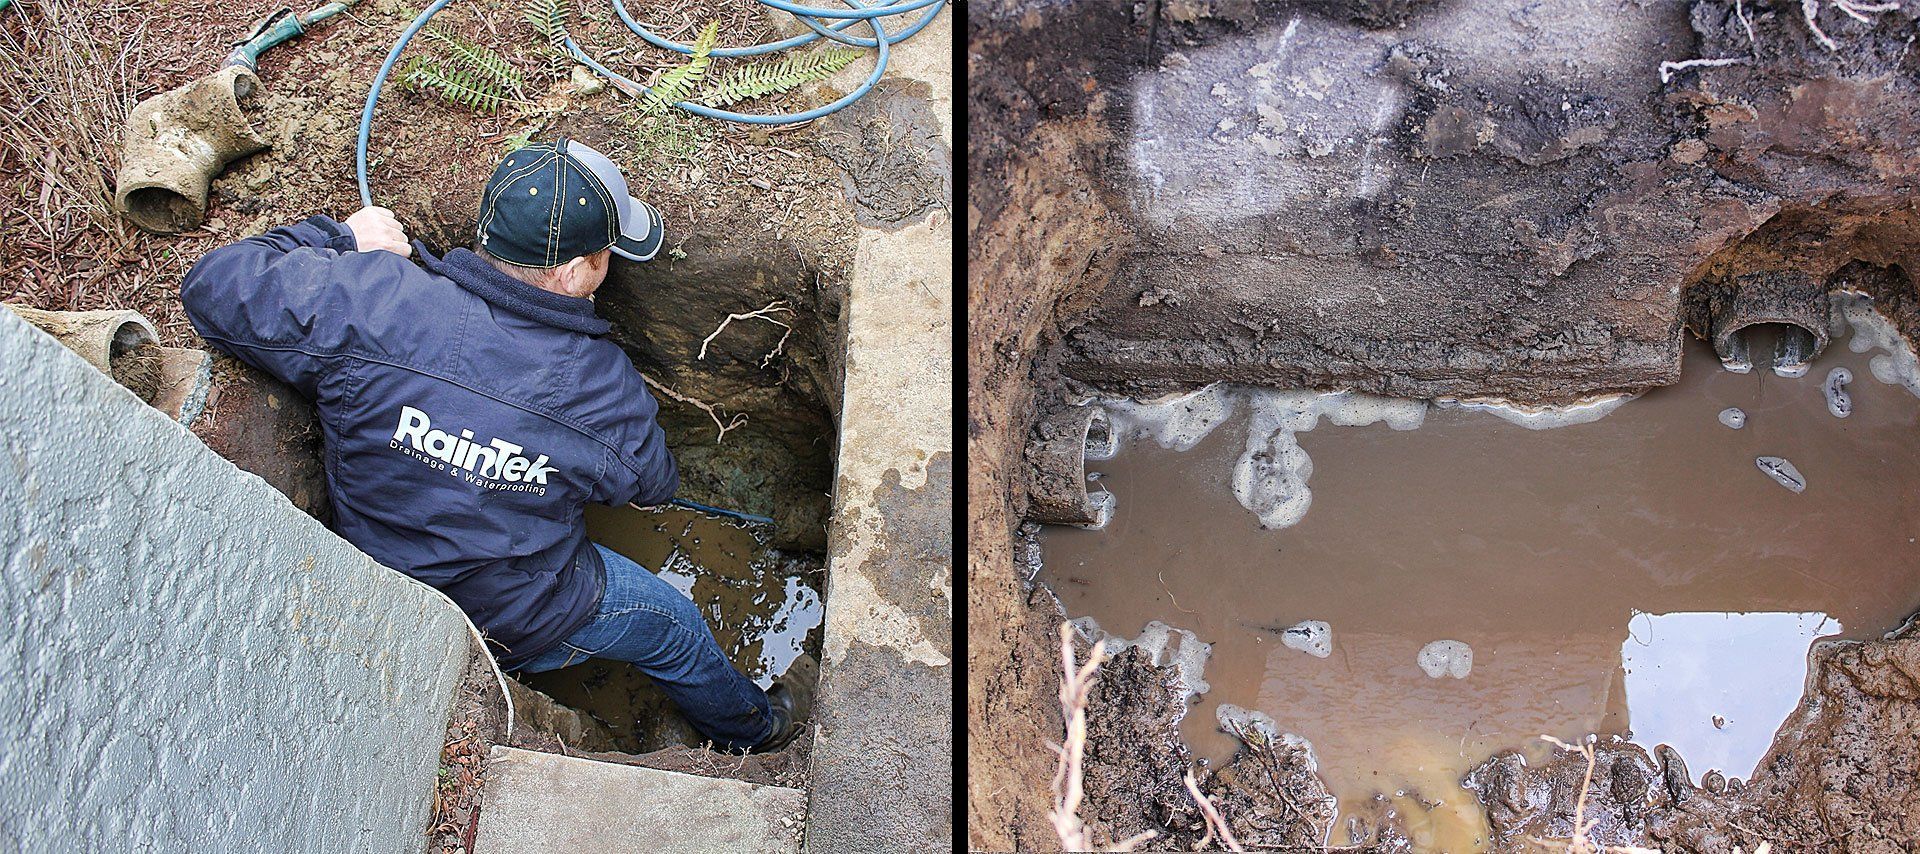 A RainTek drainage expert cleaning a clogged drainage system in Victoria BC